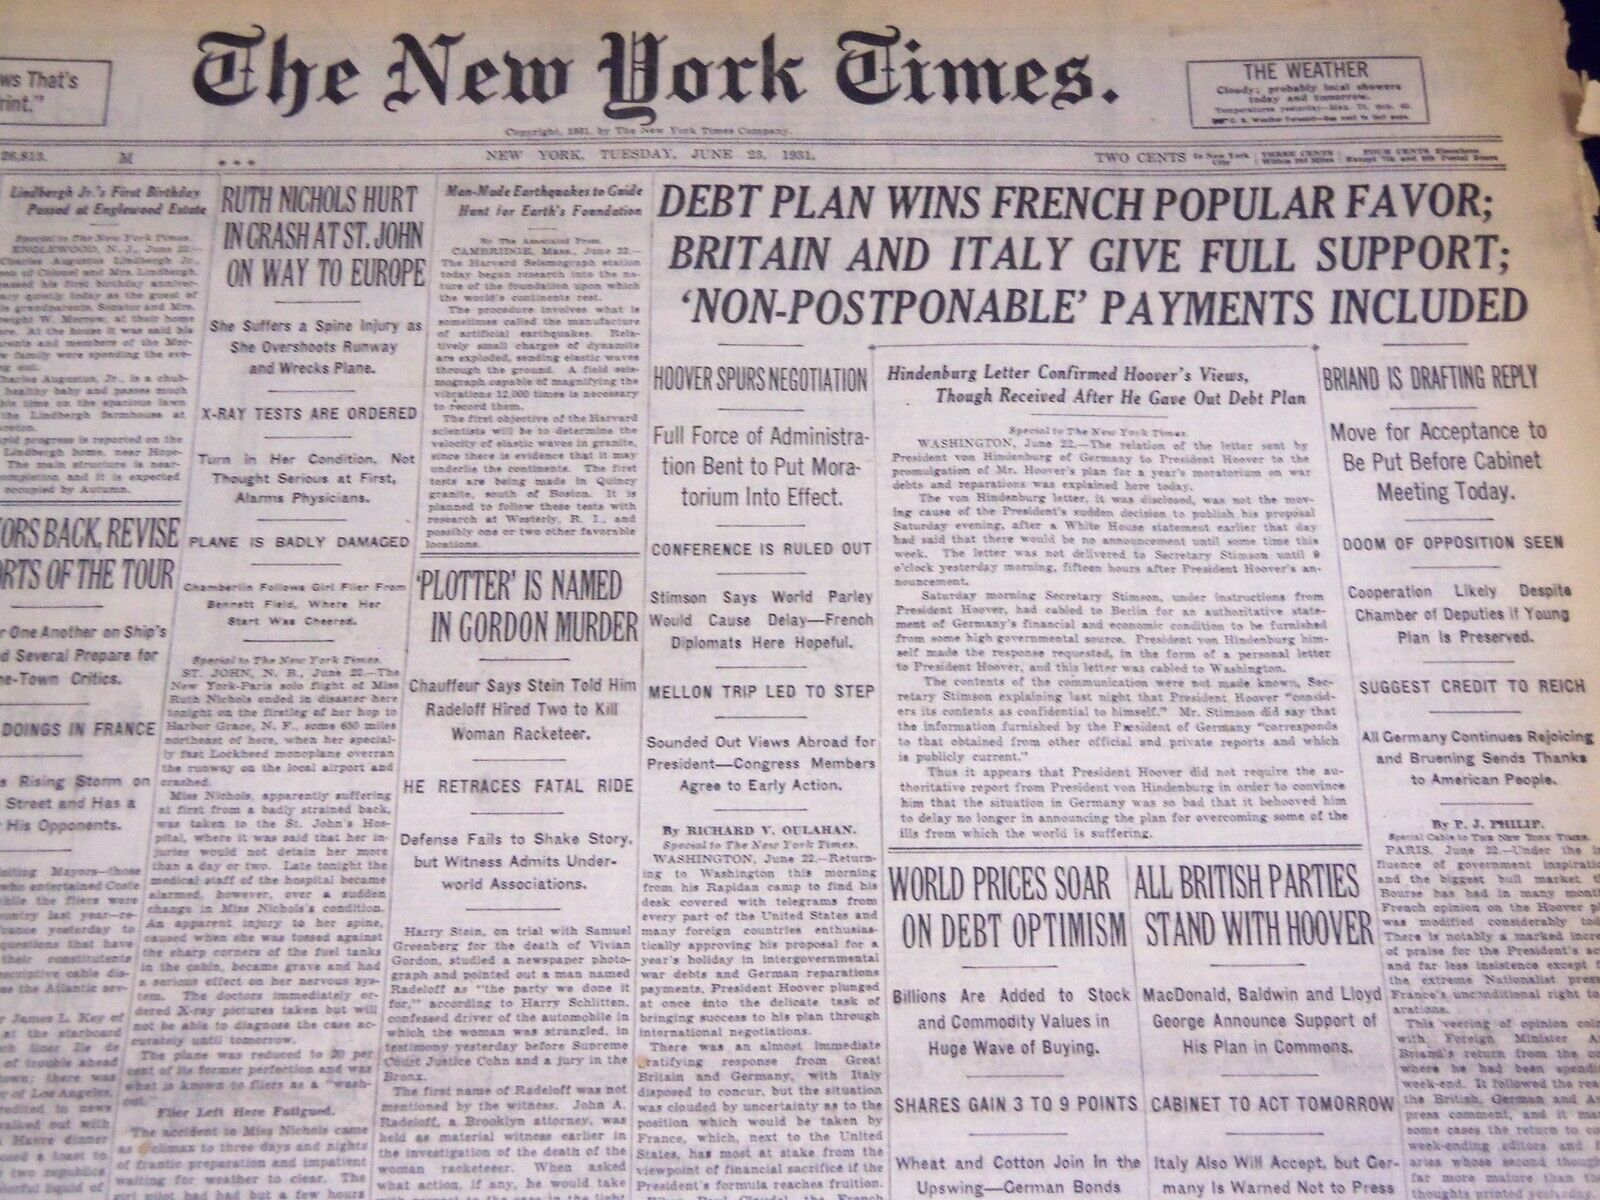 1931 JUNE 23 NEW YORK TIMES - DEBT PLAN WINS FRENCH FAVOR - NT 3957